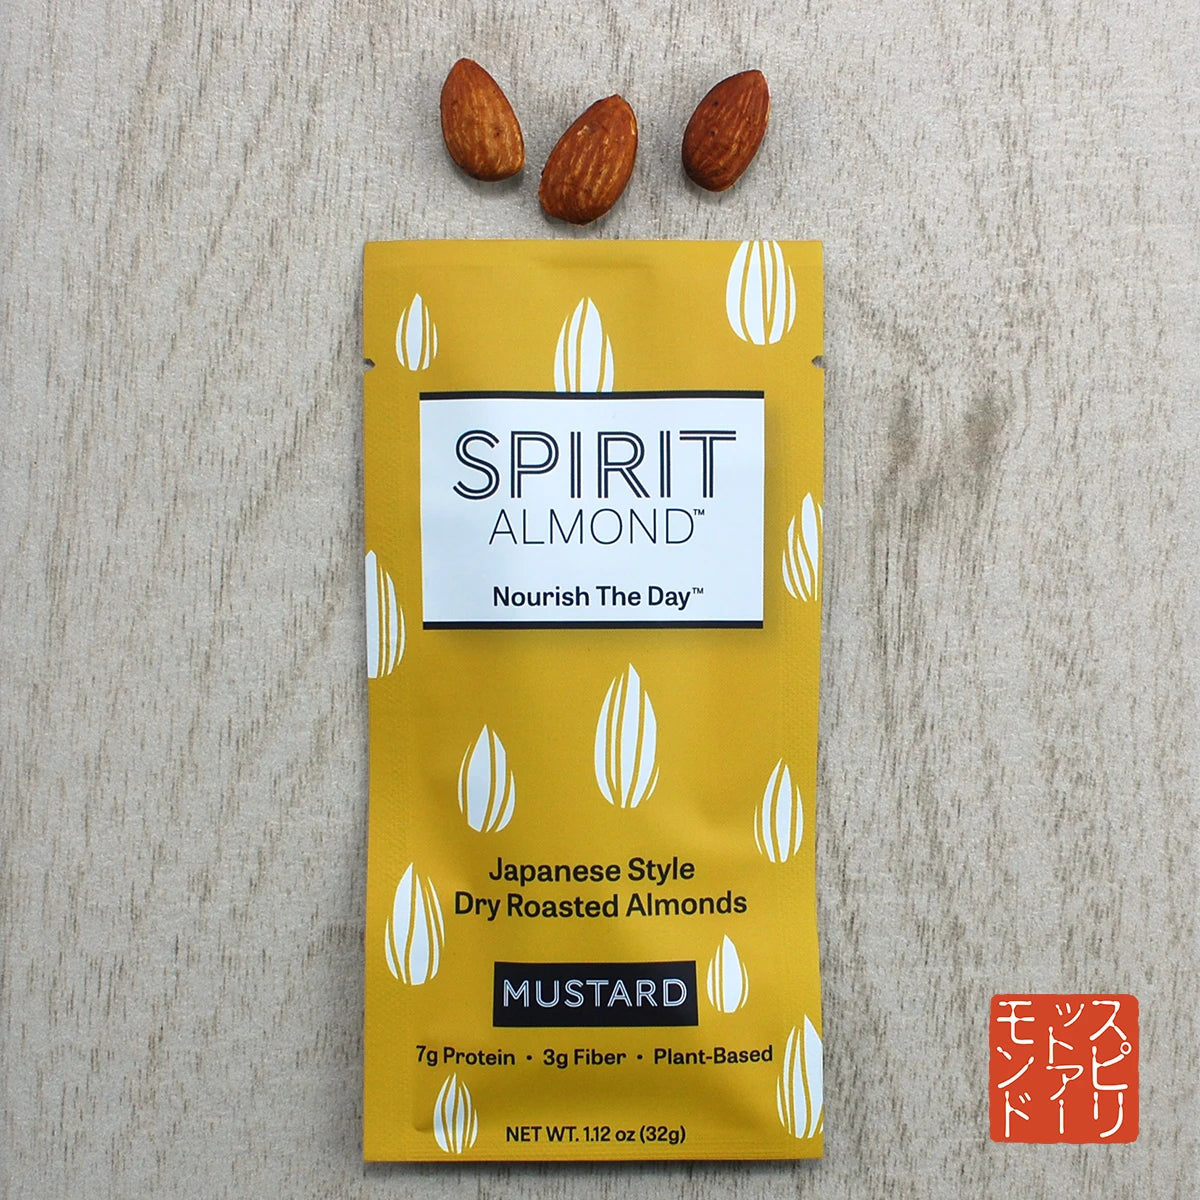 Package of SPIRIT Almond Mustard flavor, with a few almonds displayed